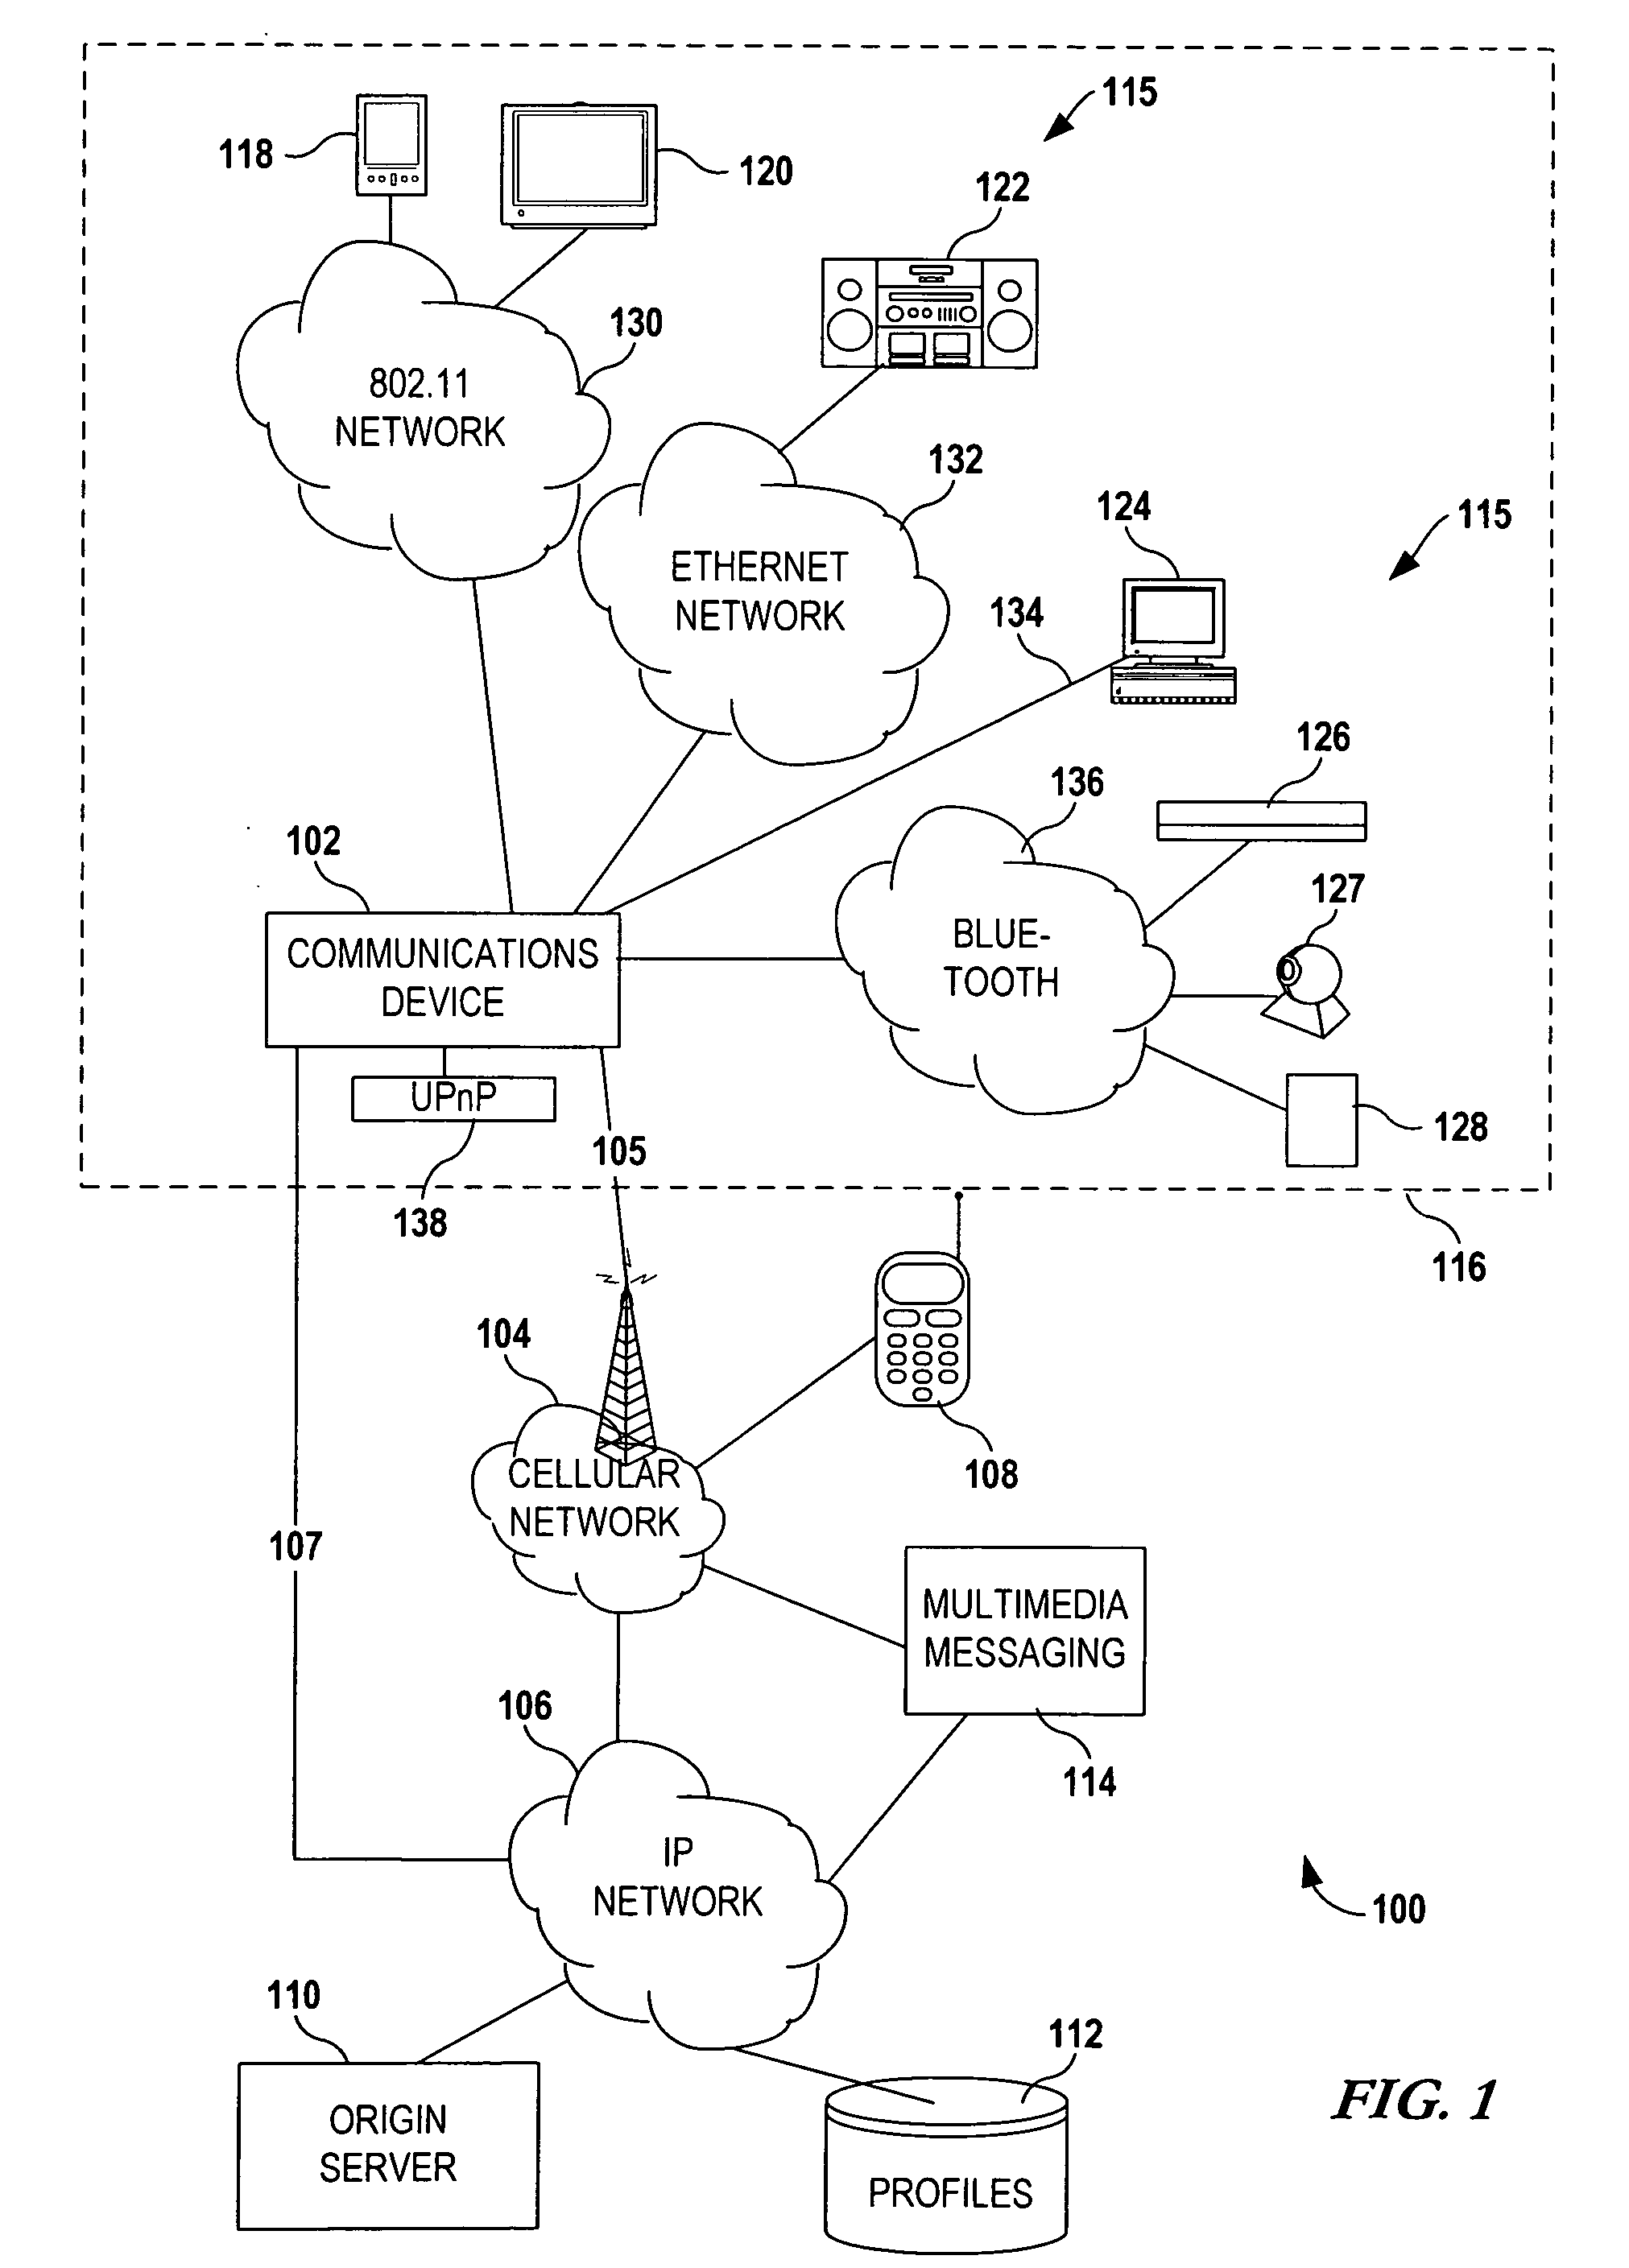 Exchanging multimedia data via a communications device